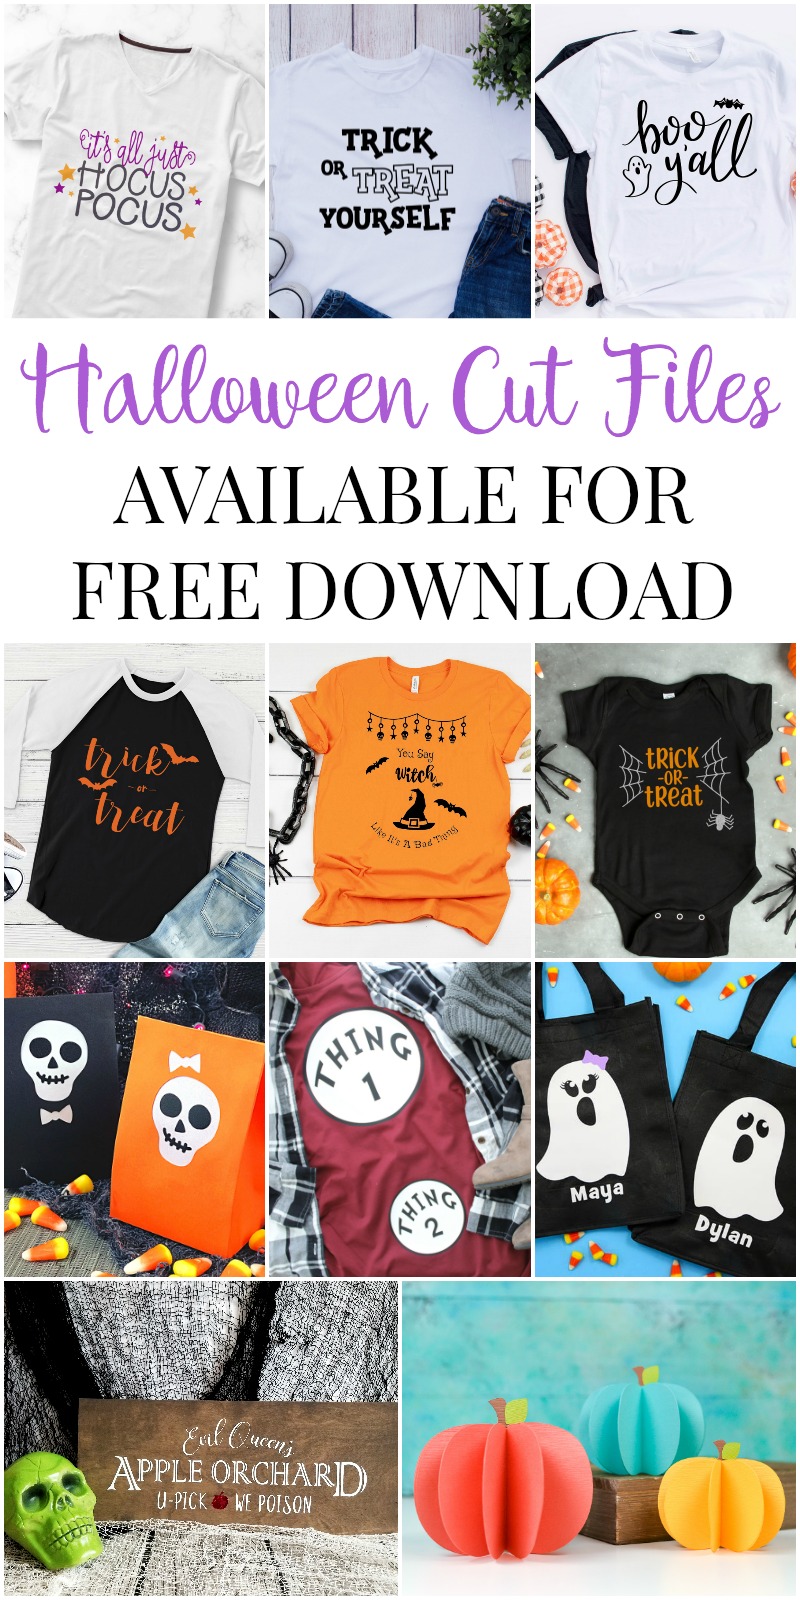 Download Halloween Maternity Shirt: Dr. Seuss Inspired - The Country Chic Cottage